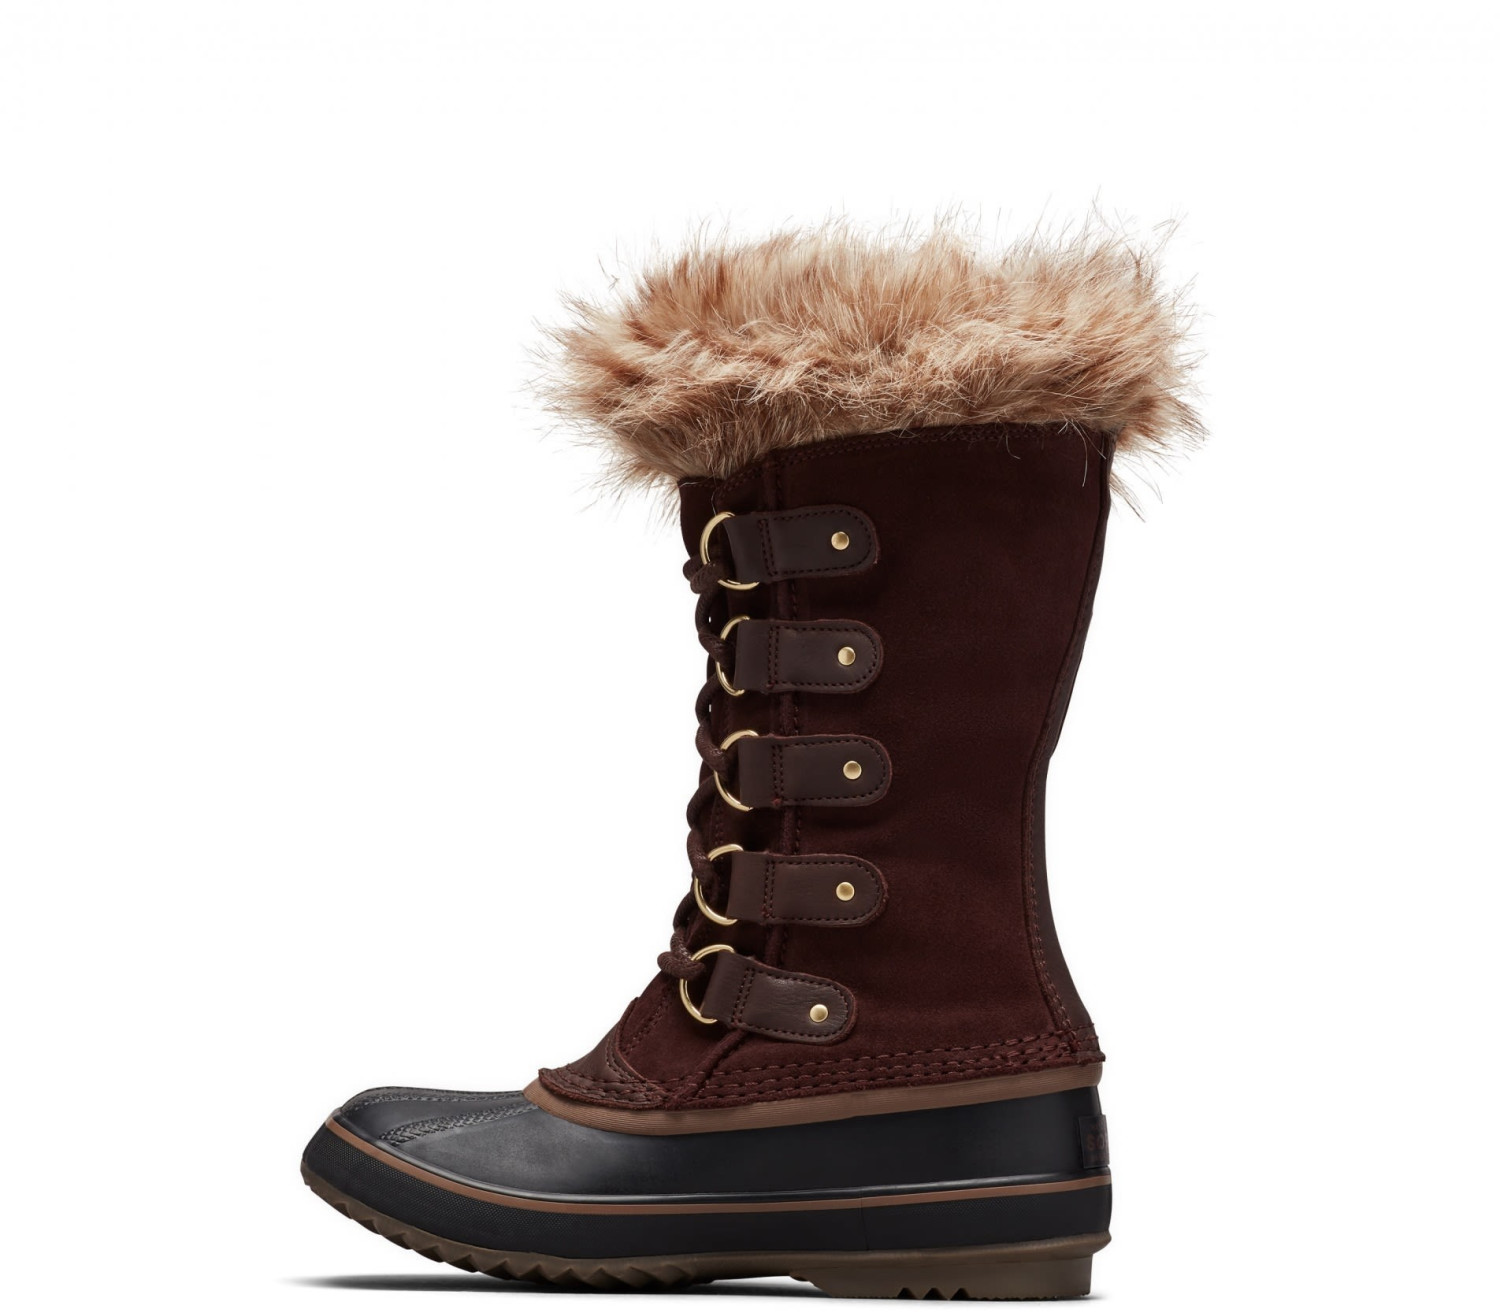 Buy Sorel Women's Joan Of Arctic cattail/black from £91.45 (Today ...